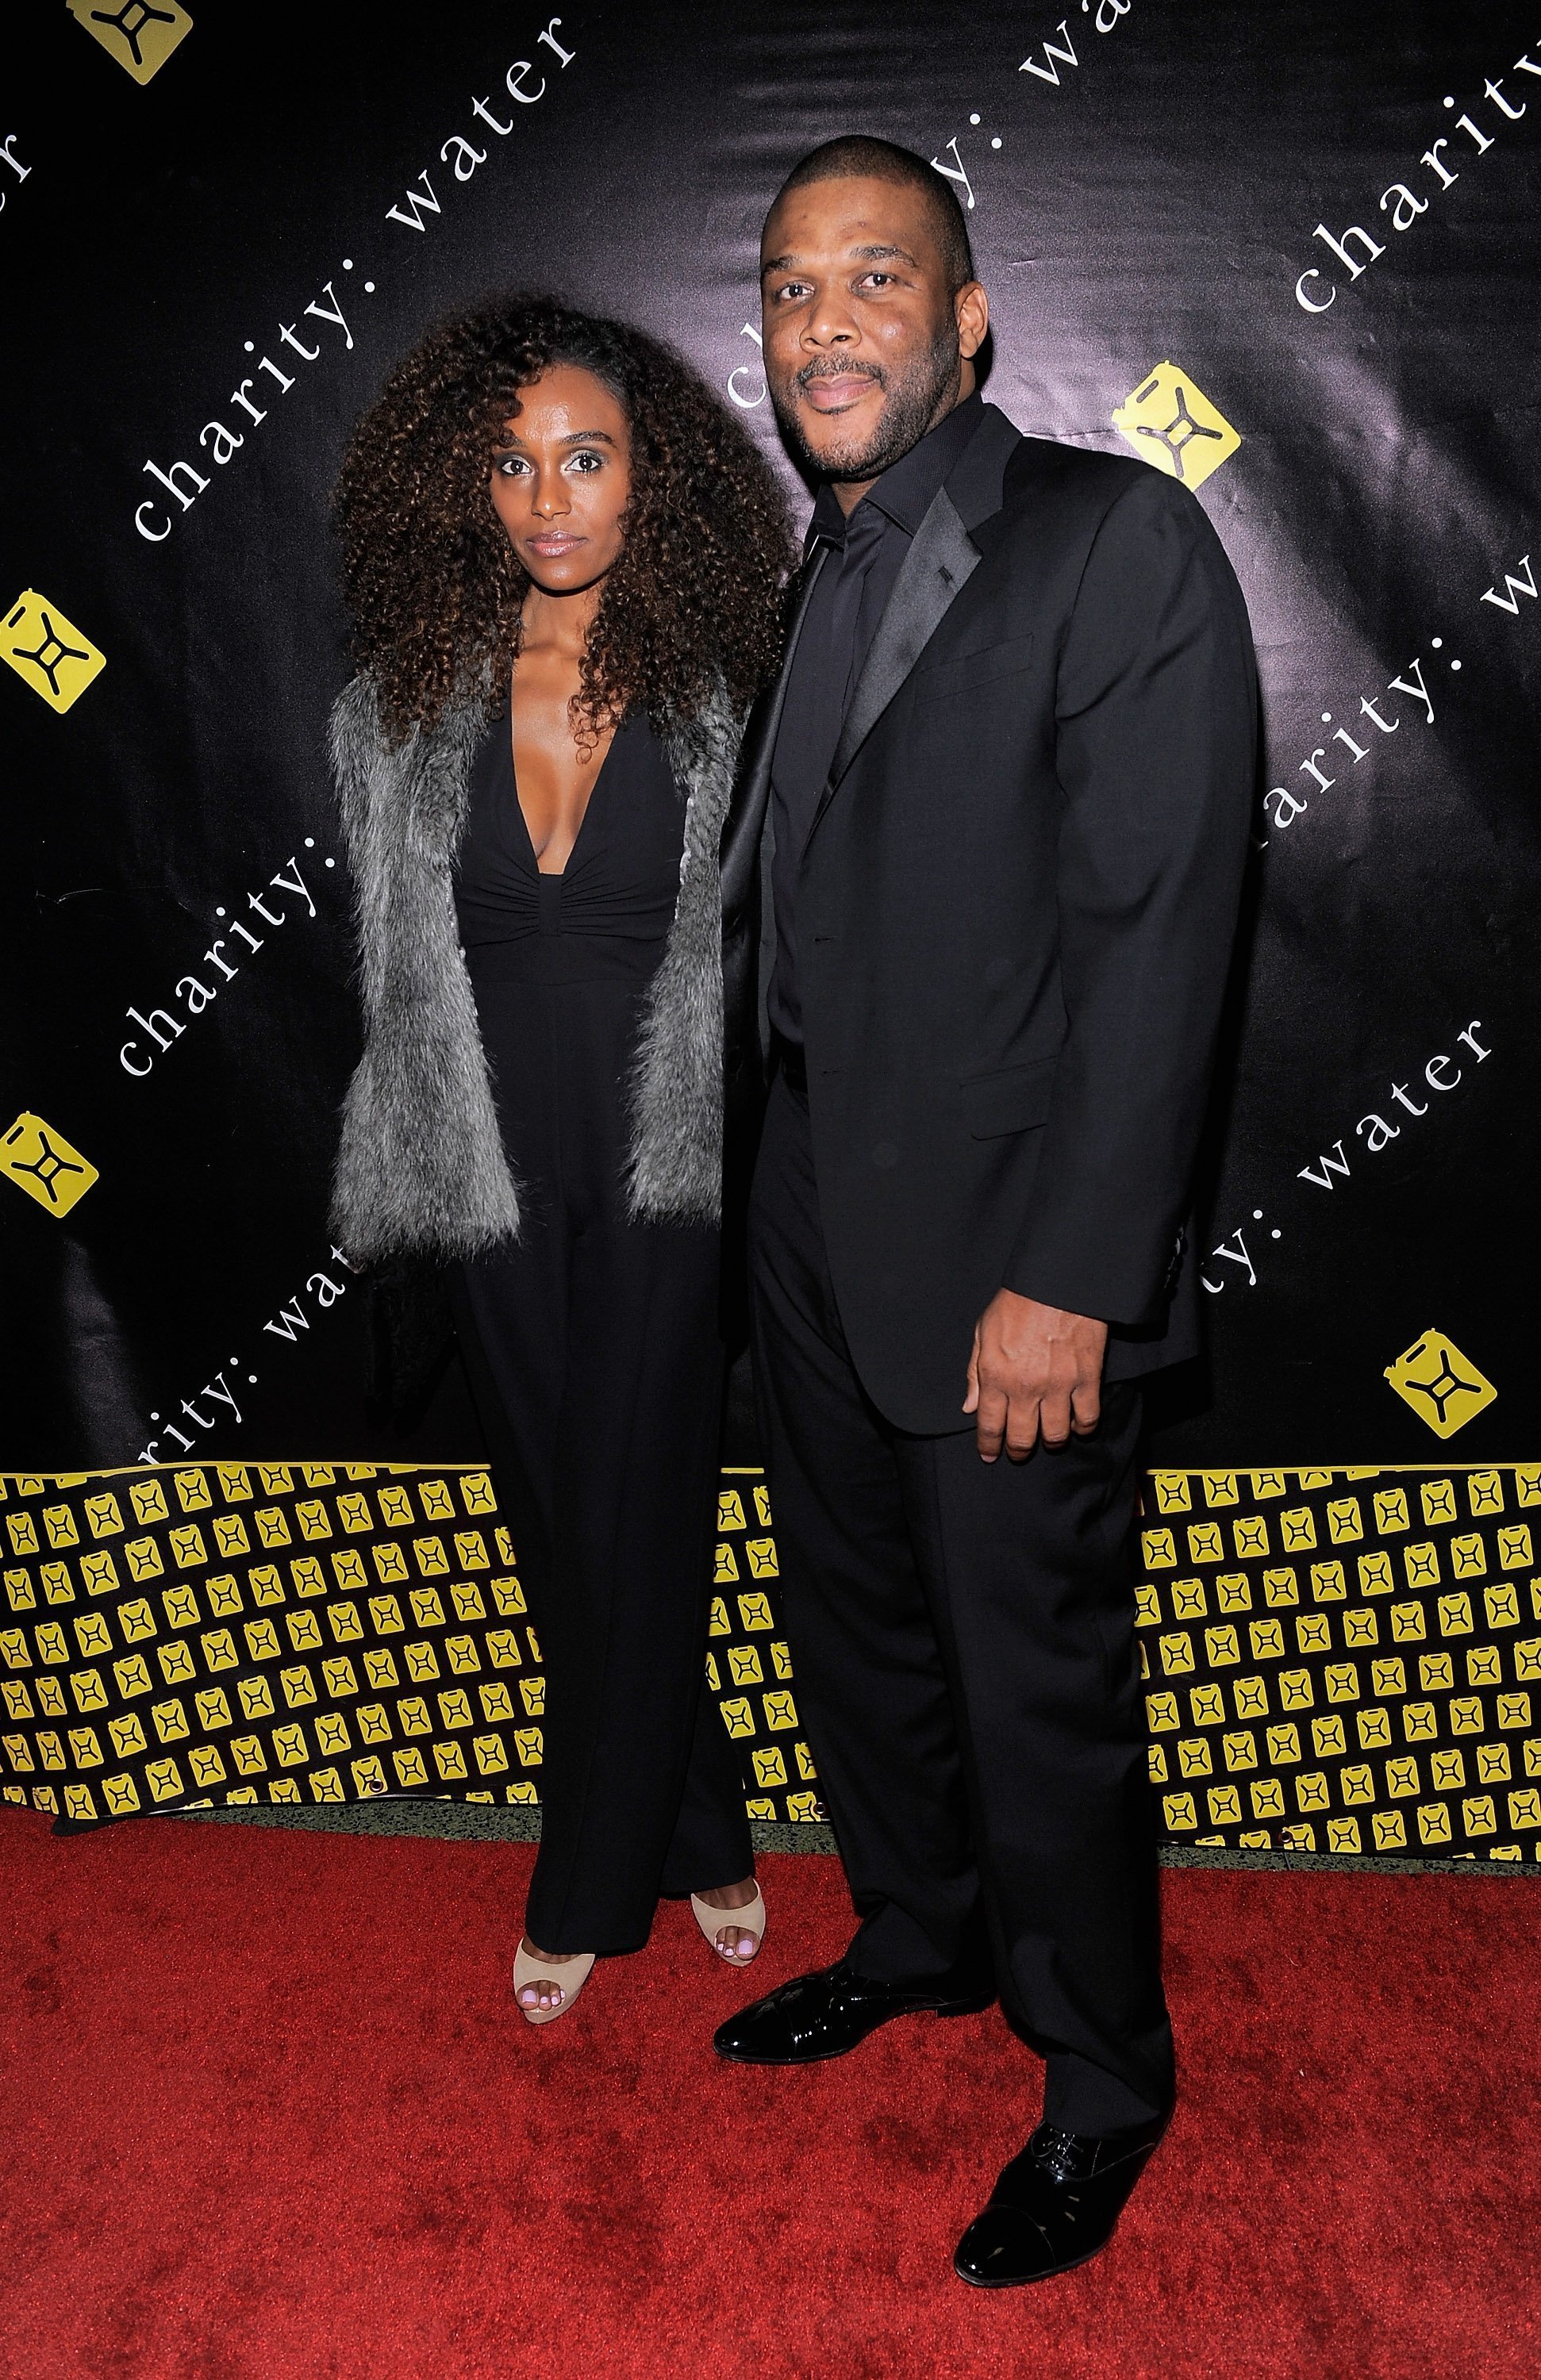 Gelila Bekele and Tyler Perry pose at the 6th Annual Charity: Ball on December 12, 2011 l Source: Getty Images